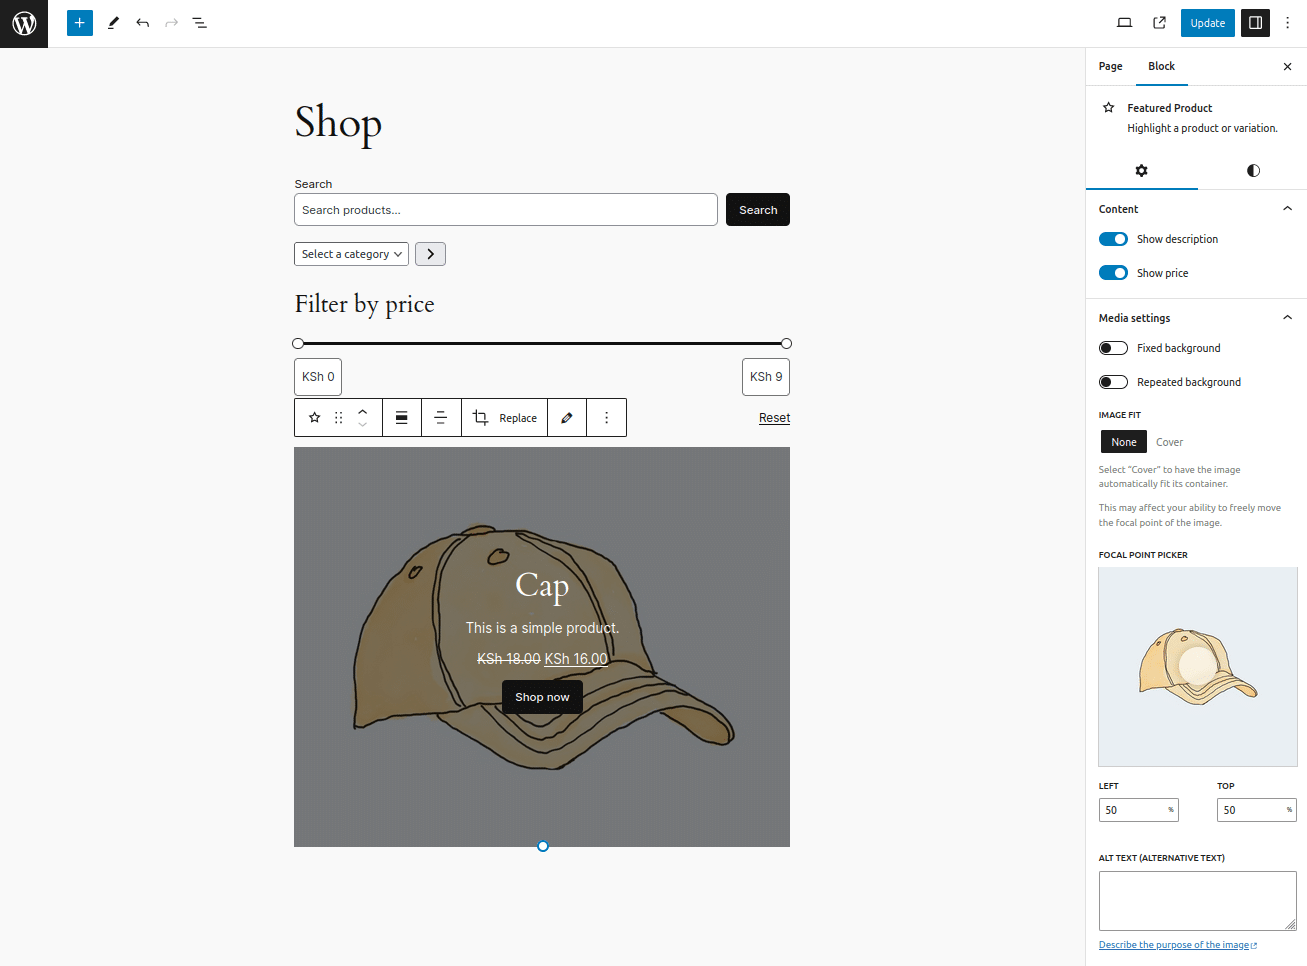 The Shop page shows the featured cap product with some settings for the featured product